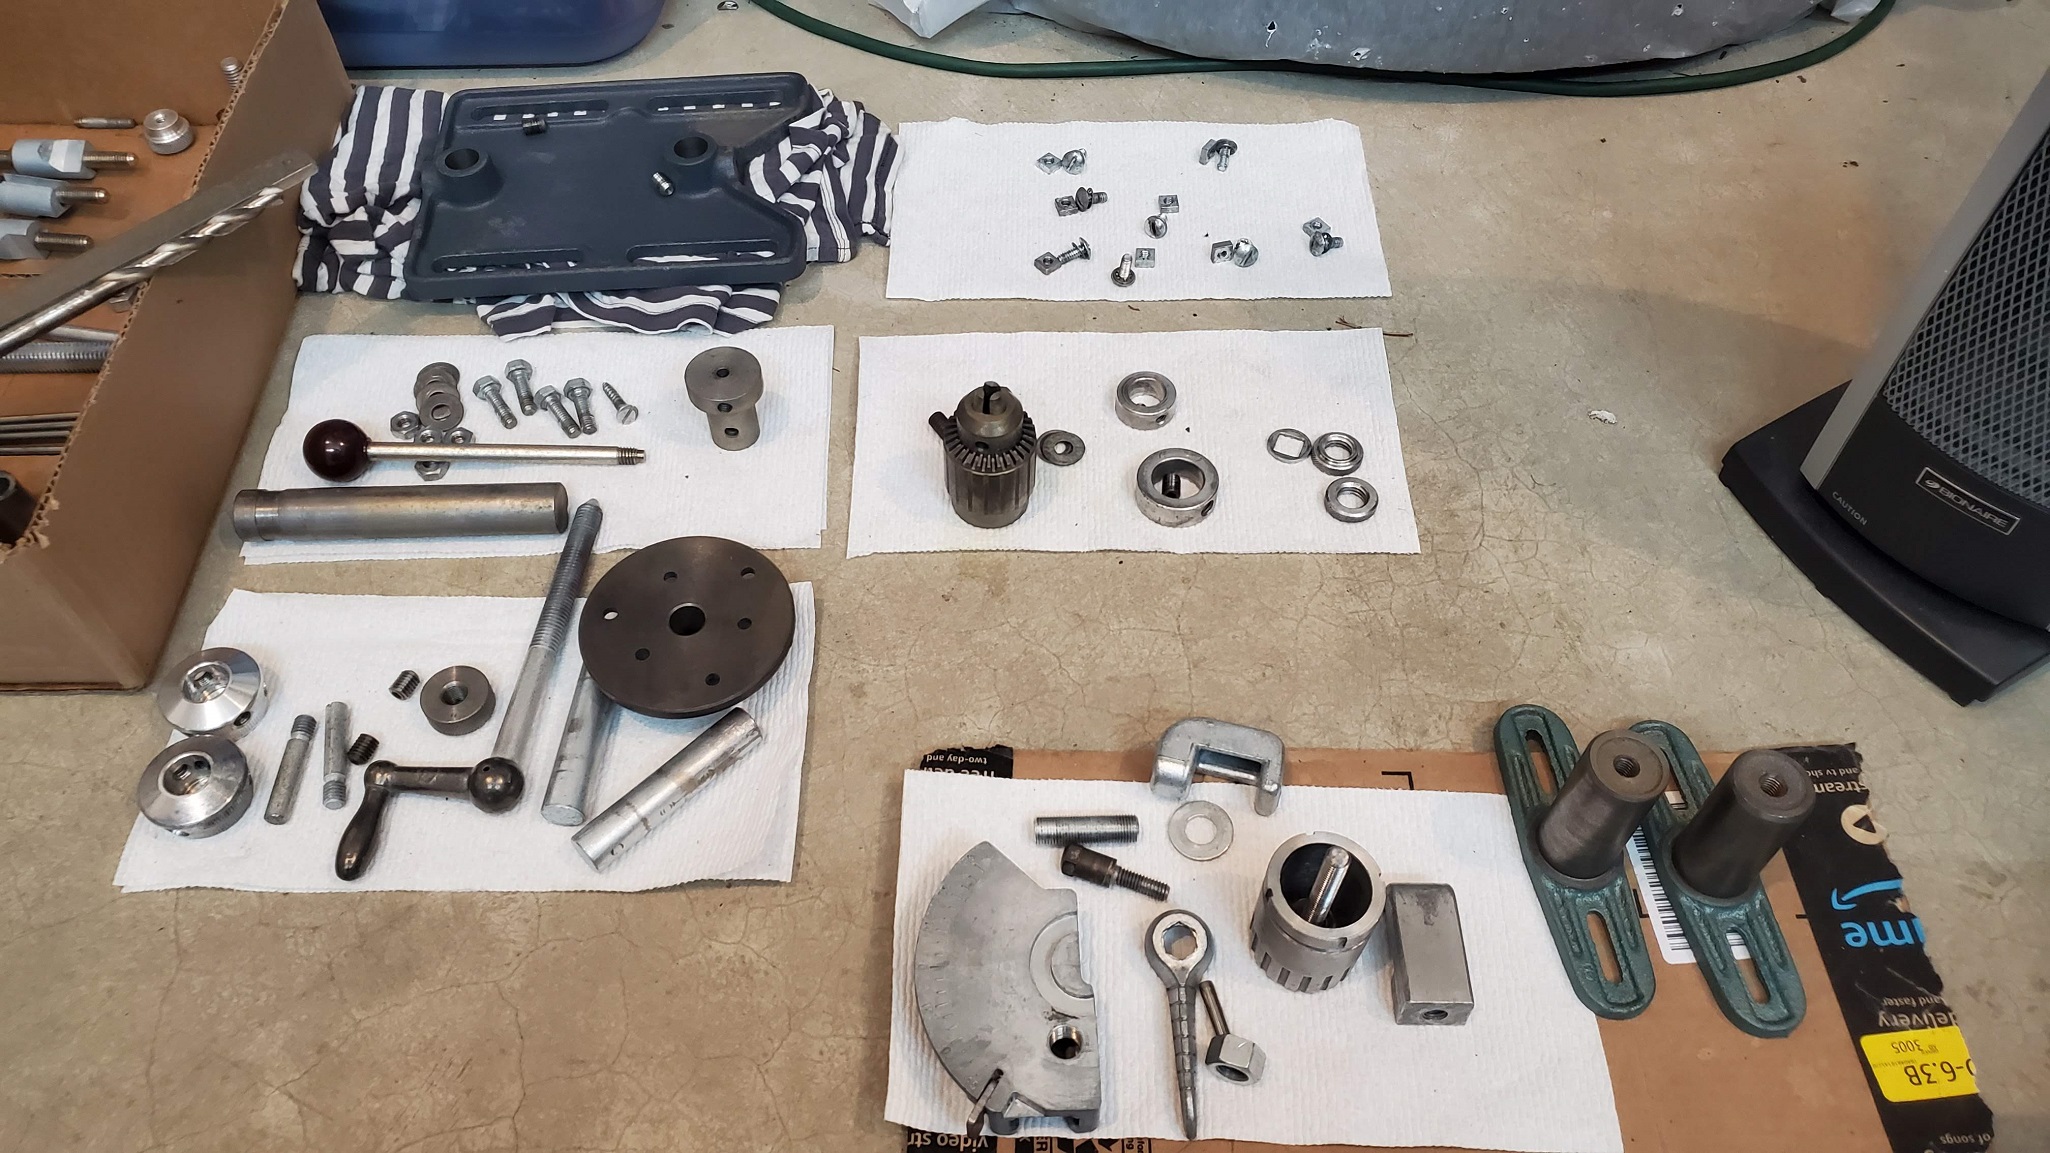 Random cleaned parts